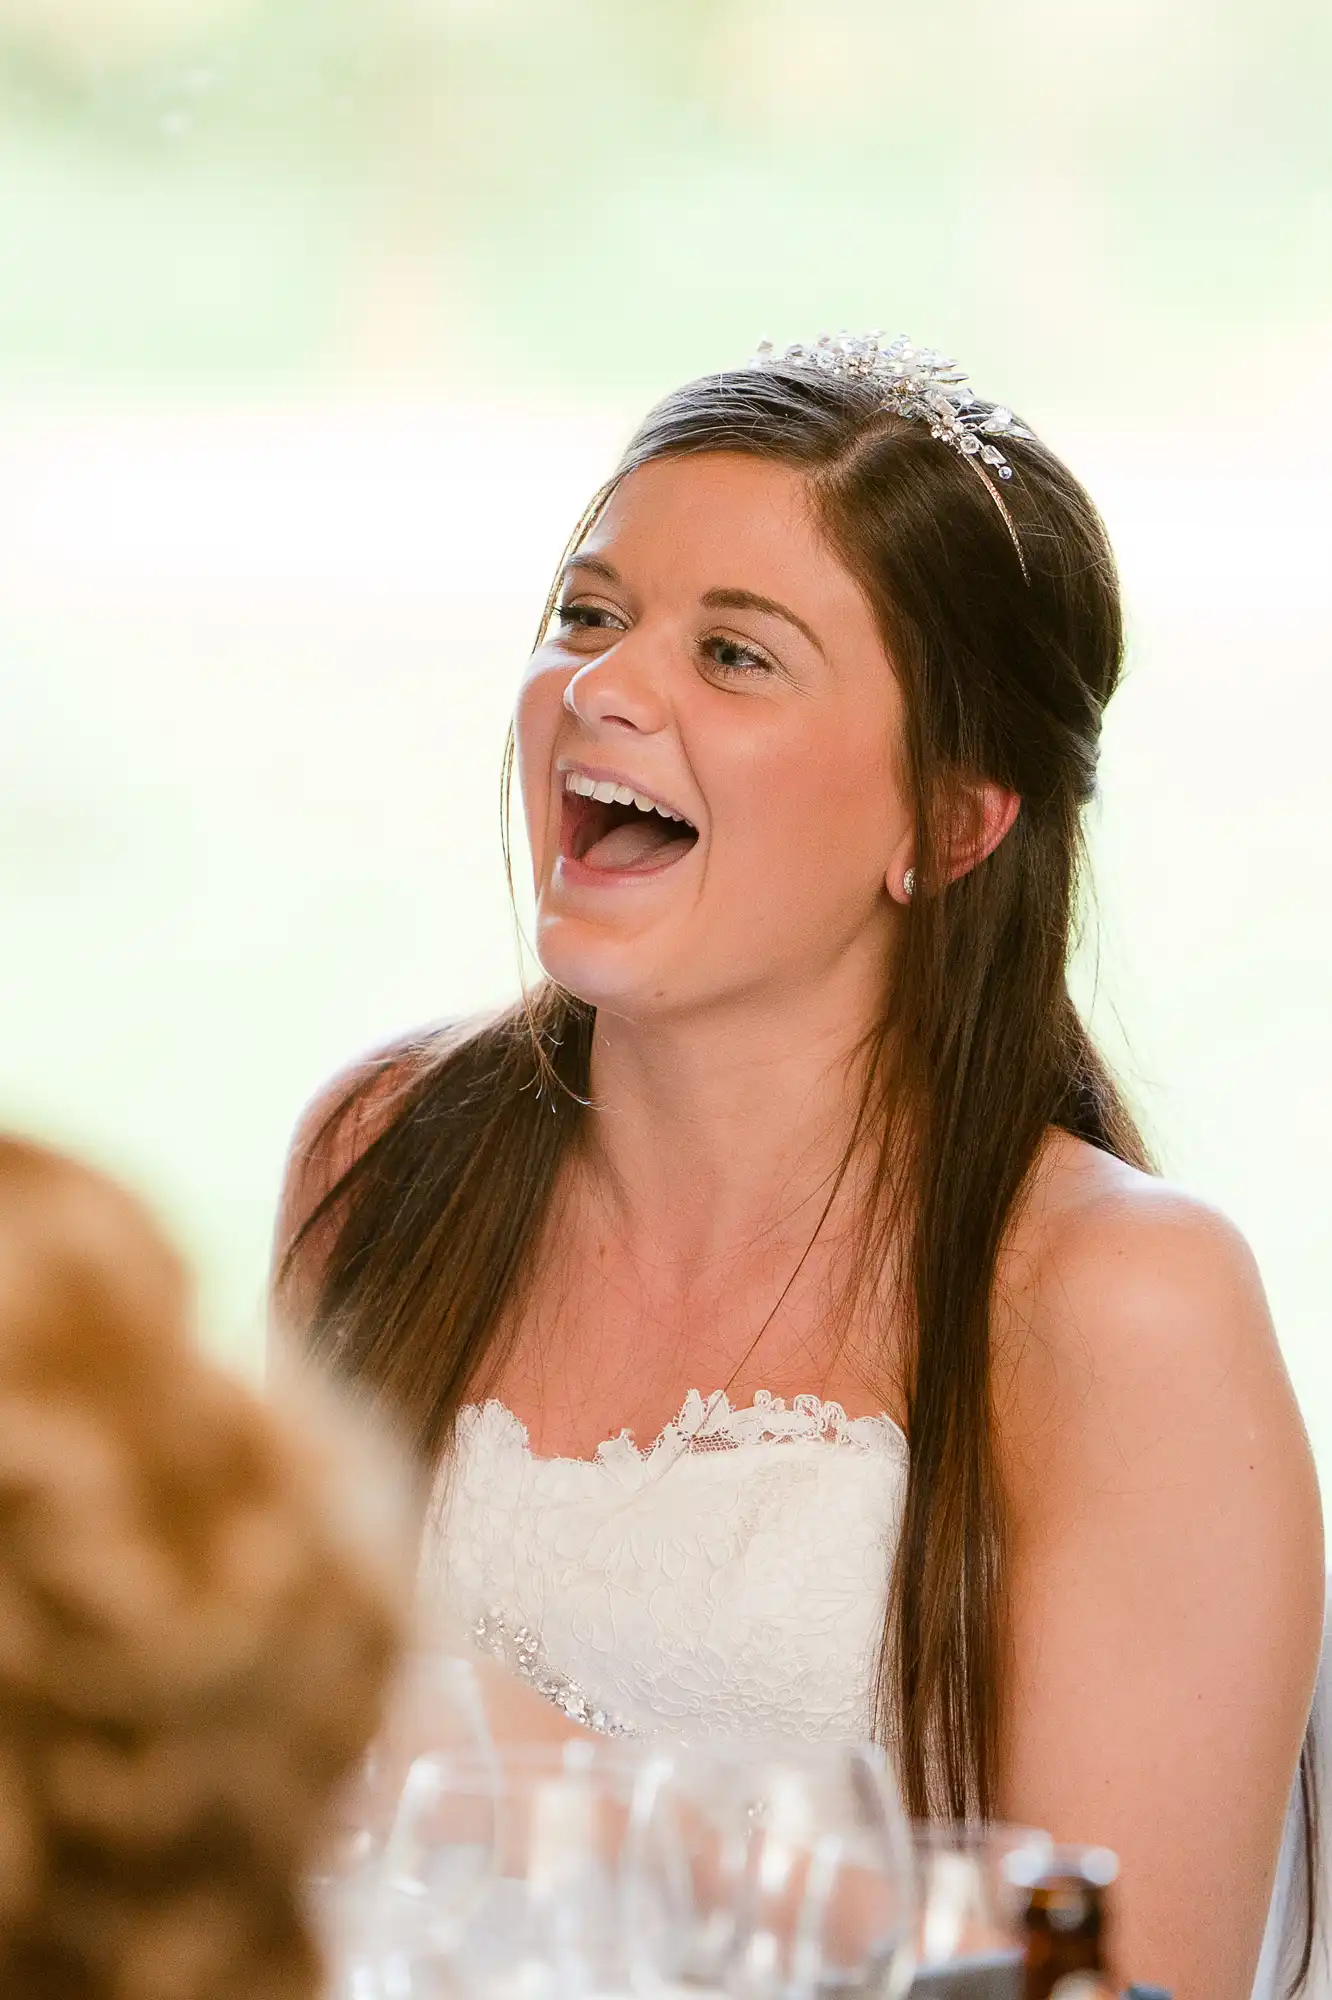 A joyful bride in a white dress with a tiara laughing at a wedding reception.